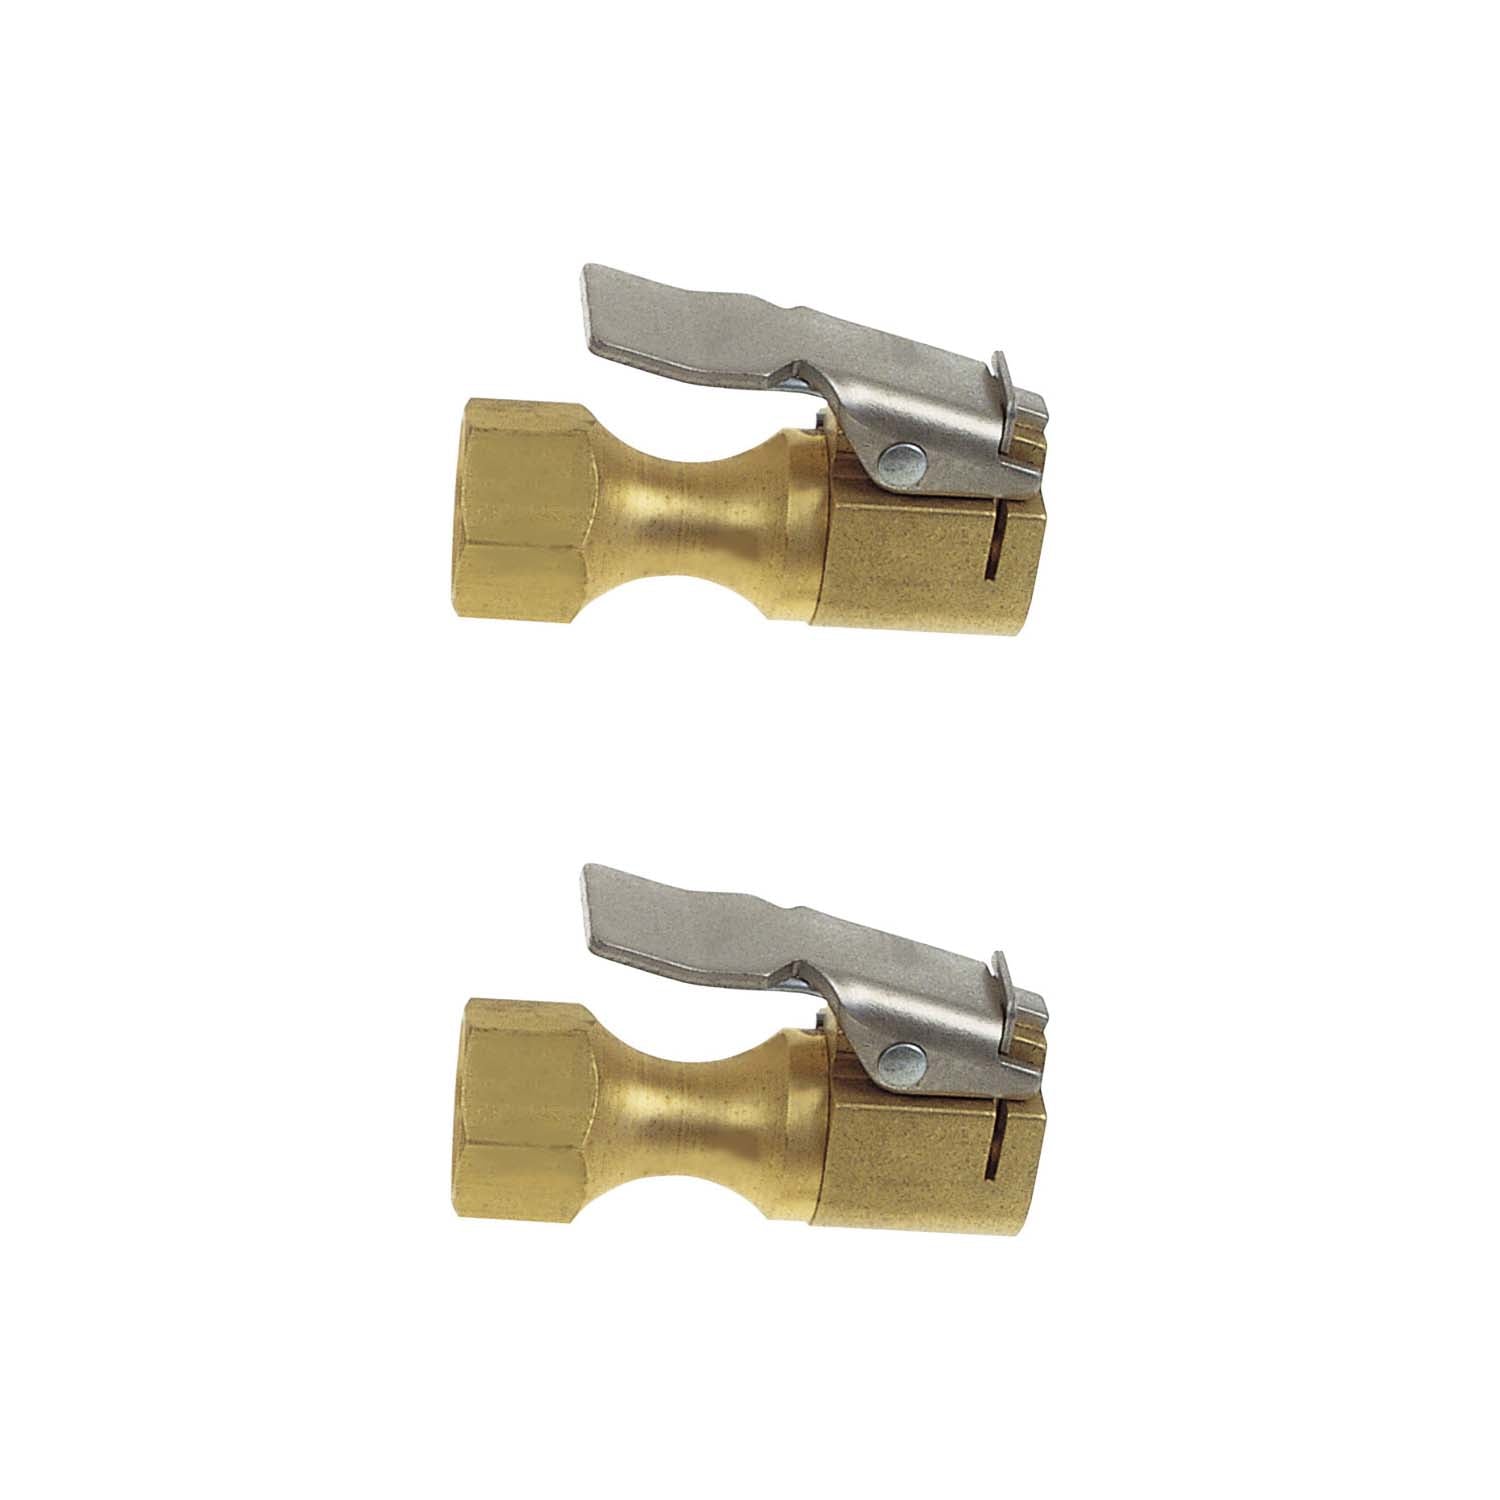 Haltec CH-360 European Style Clip-On Air Chuck 1/4" Female Fitting Pack of 2